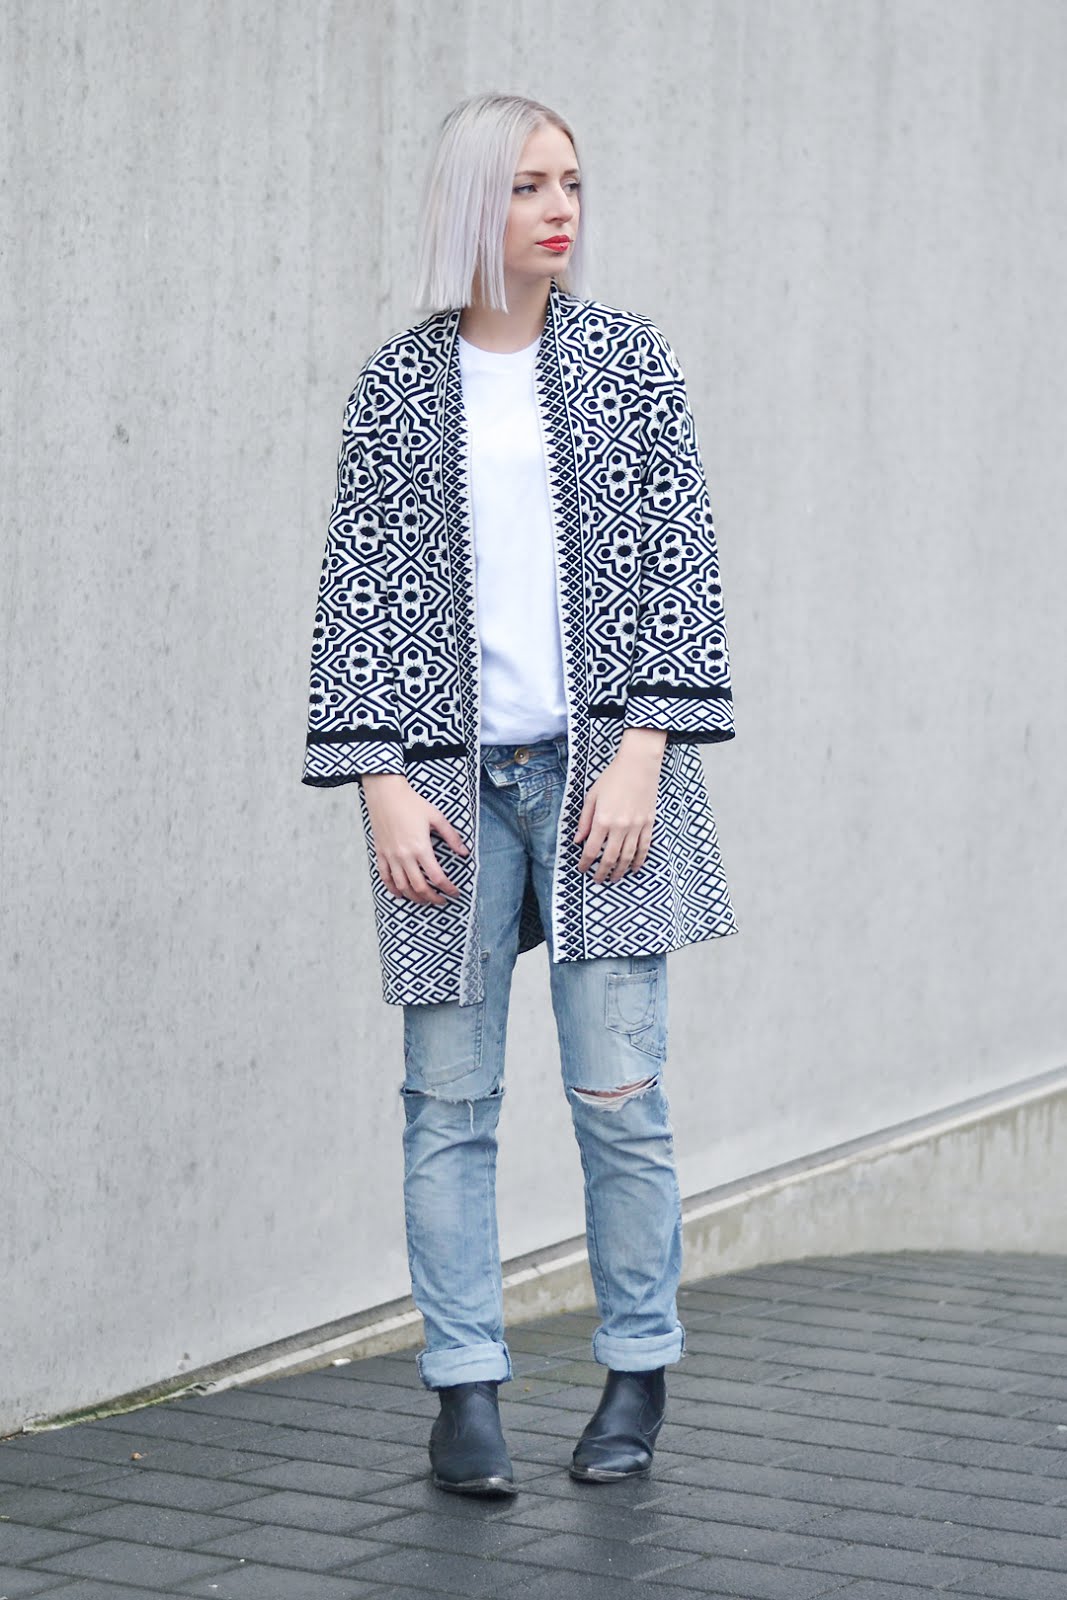 Shein, sheinside, ootd, outfit, black & white cardigan, geometric, casual outfit, winter 2016, trends, streetstyle, zara ripped jeans, h&m pointed boots